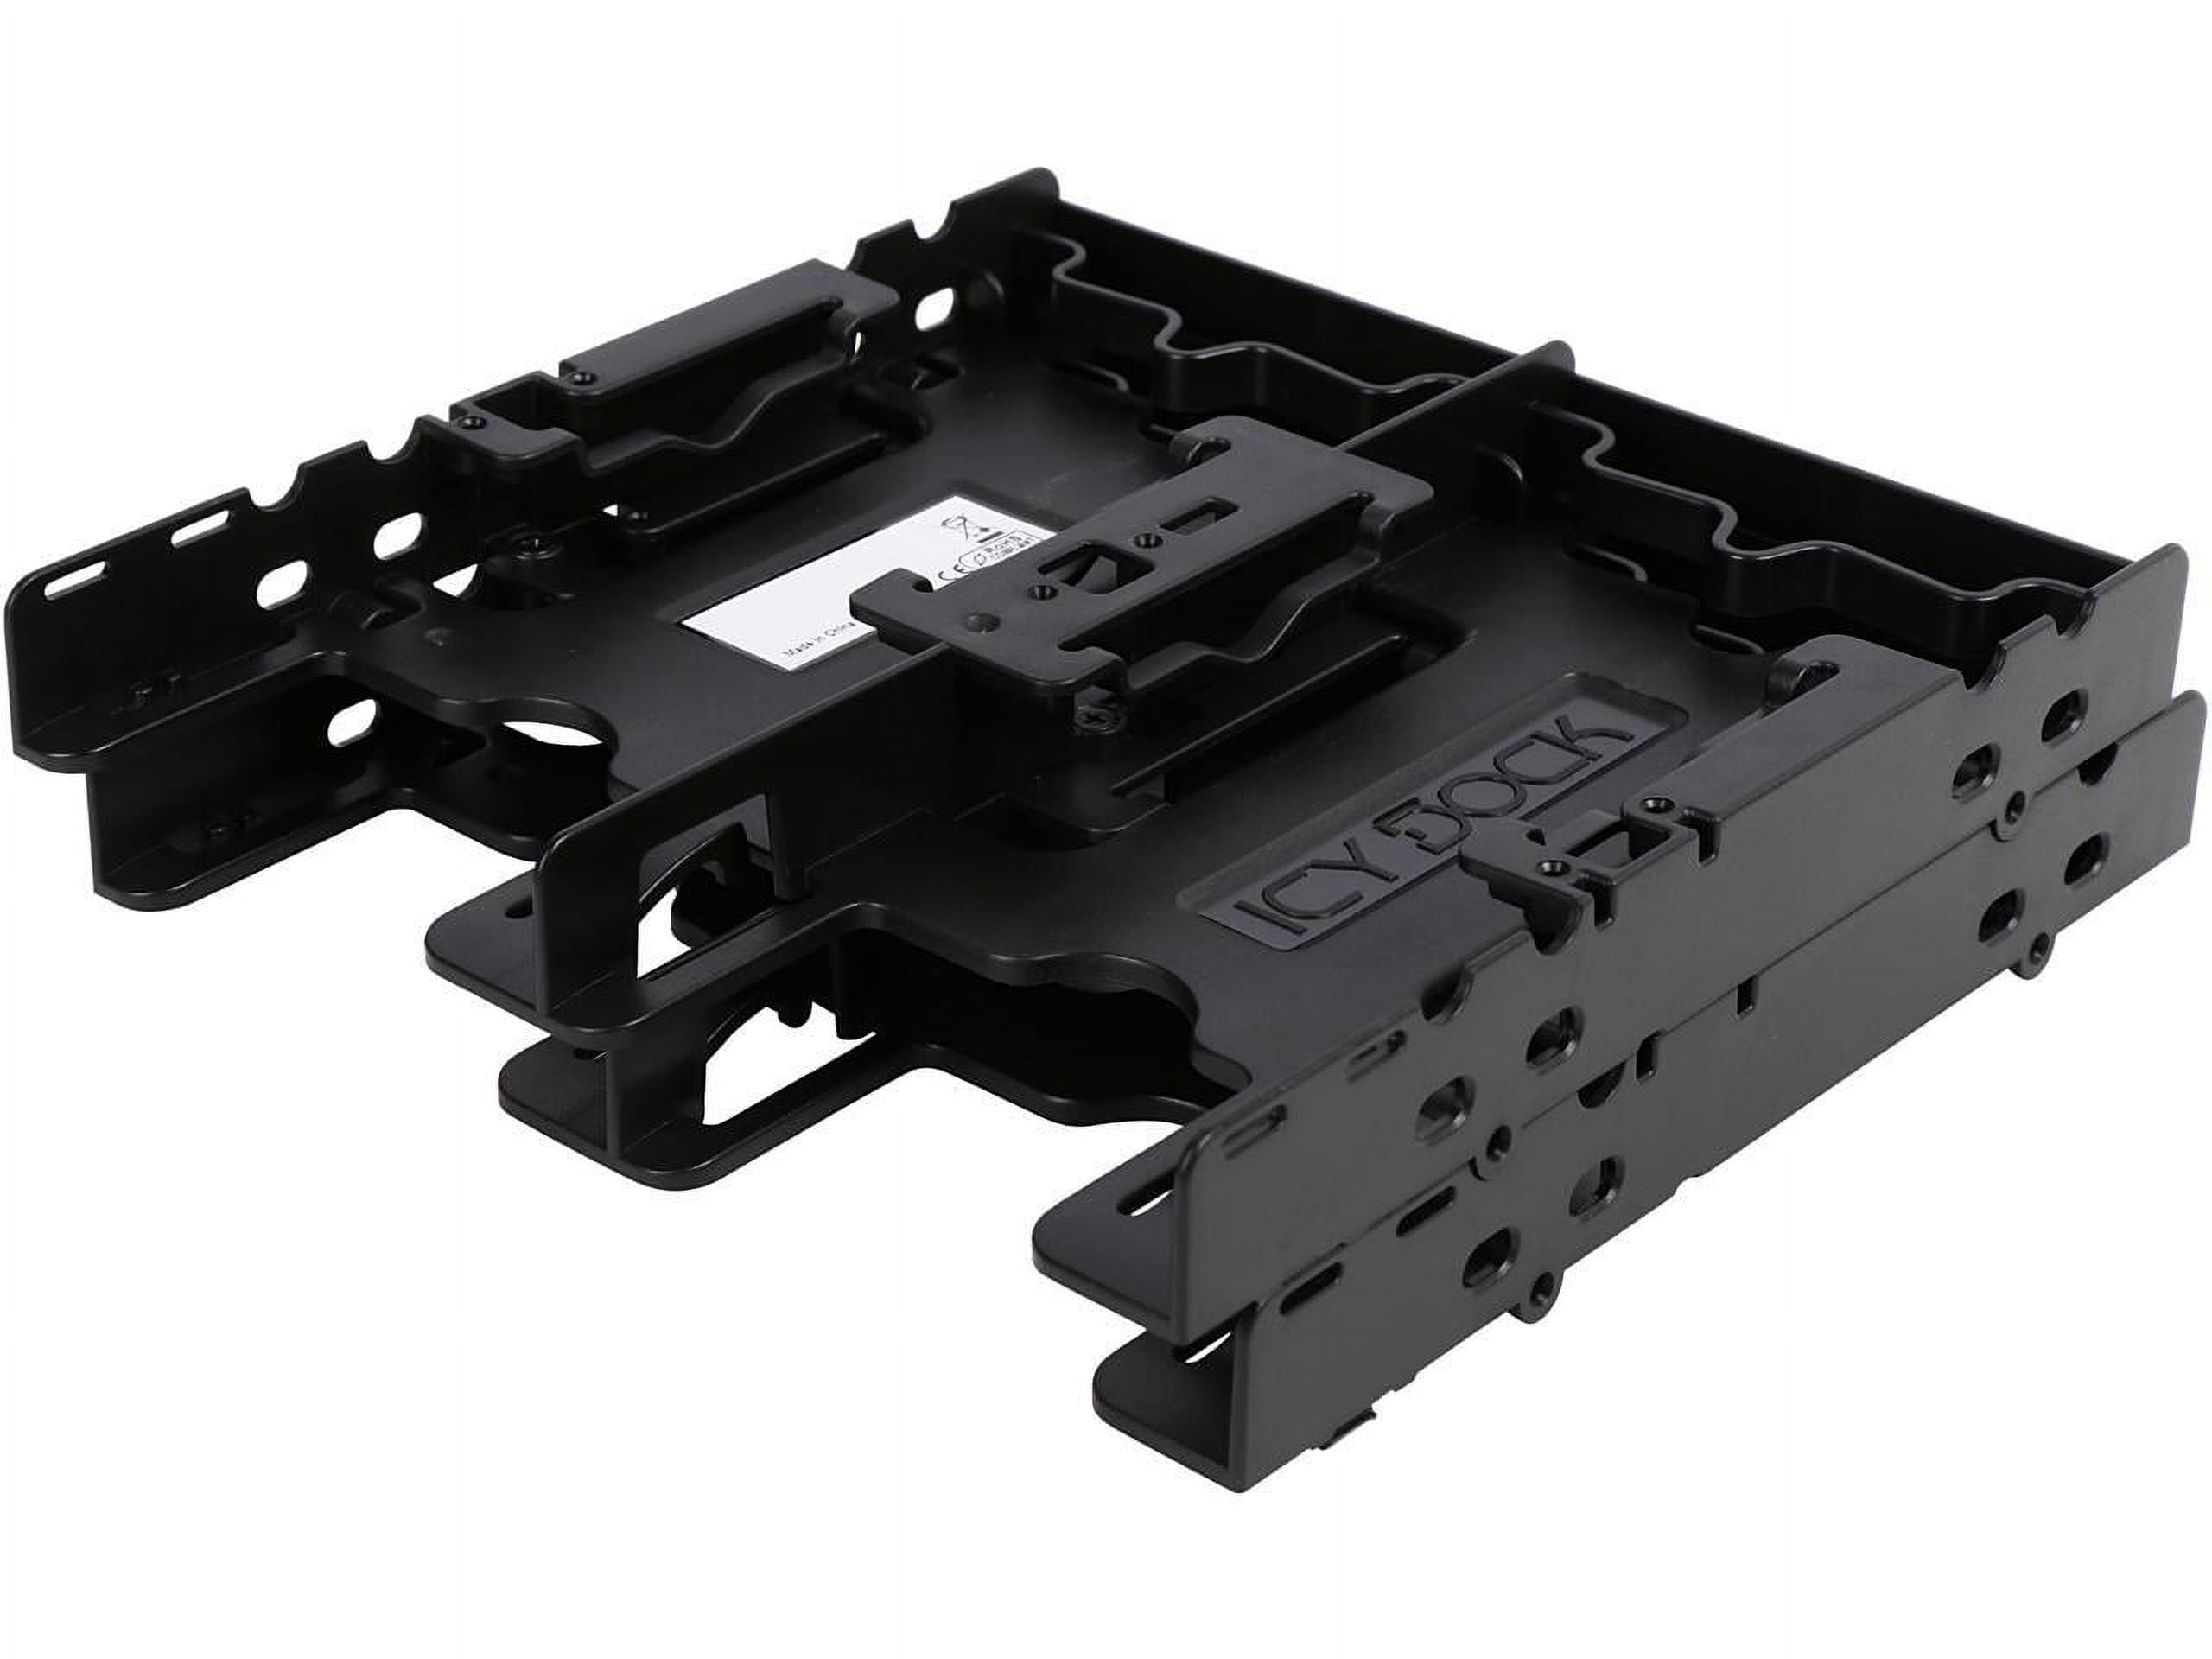 Picture of Cremax MB344SP 2.5 to 5.25 in. Flex-Fit Quattro Storage Drive Cage with 4 x 2.5 in. SATA HDD & SSD Bay